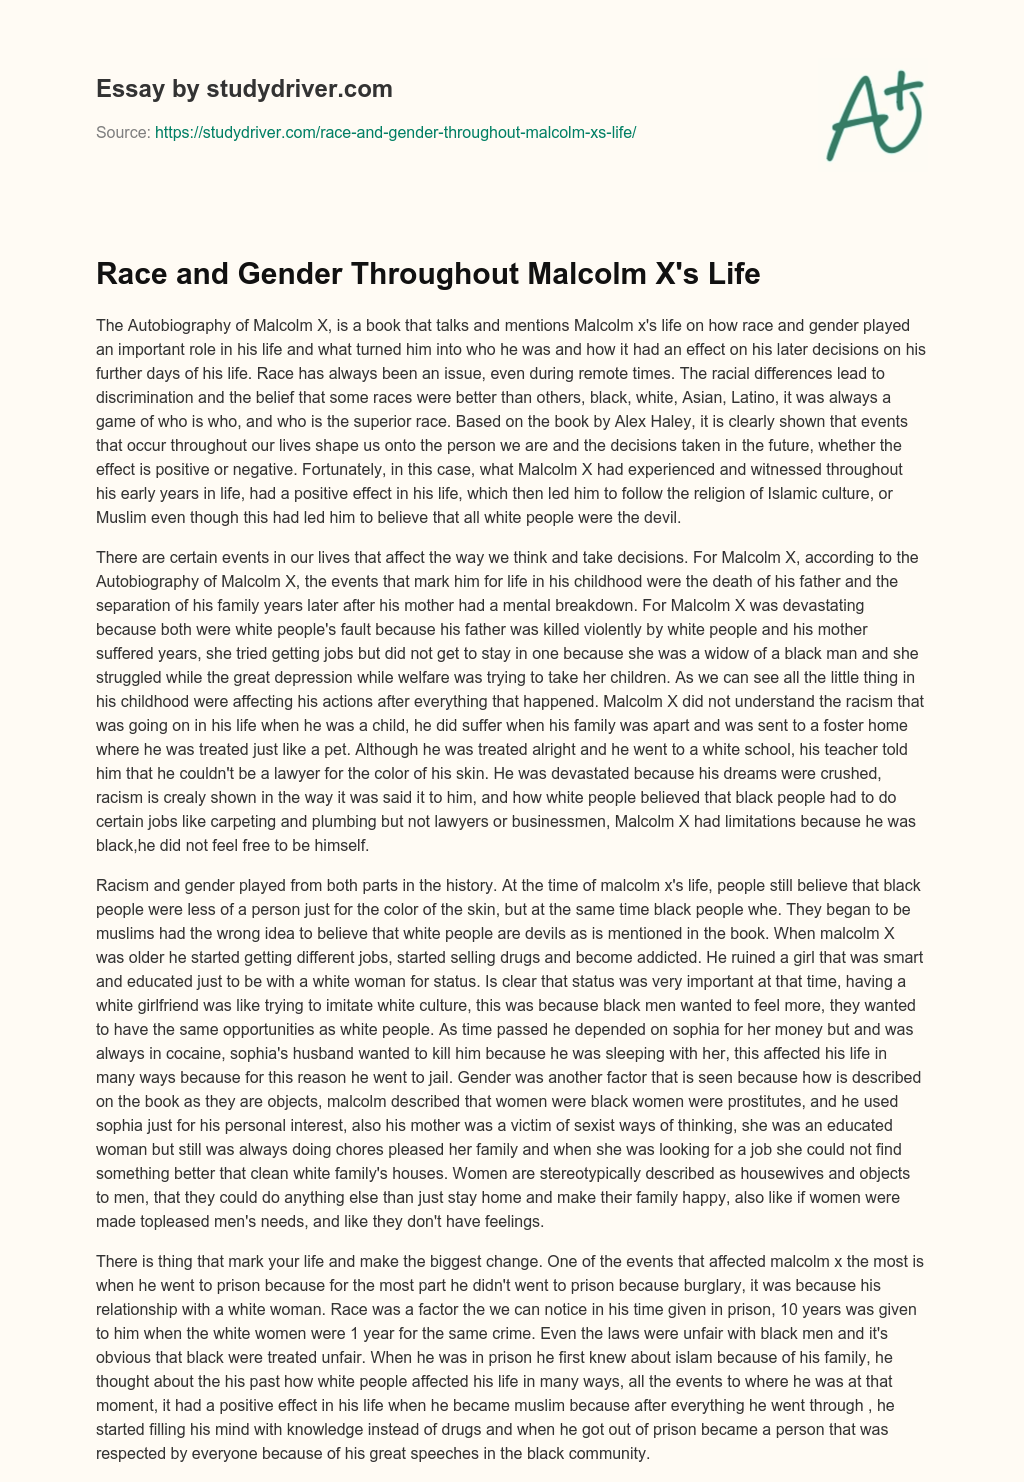 Race and Gender Throughout Malcolm X’s Life essay